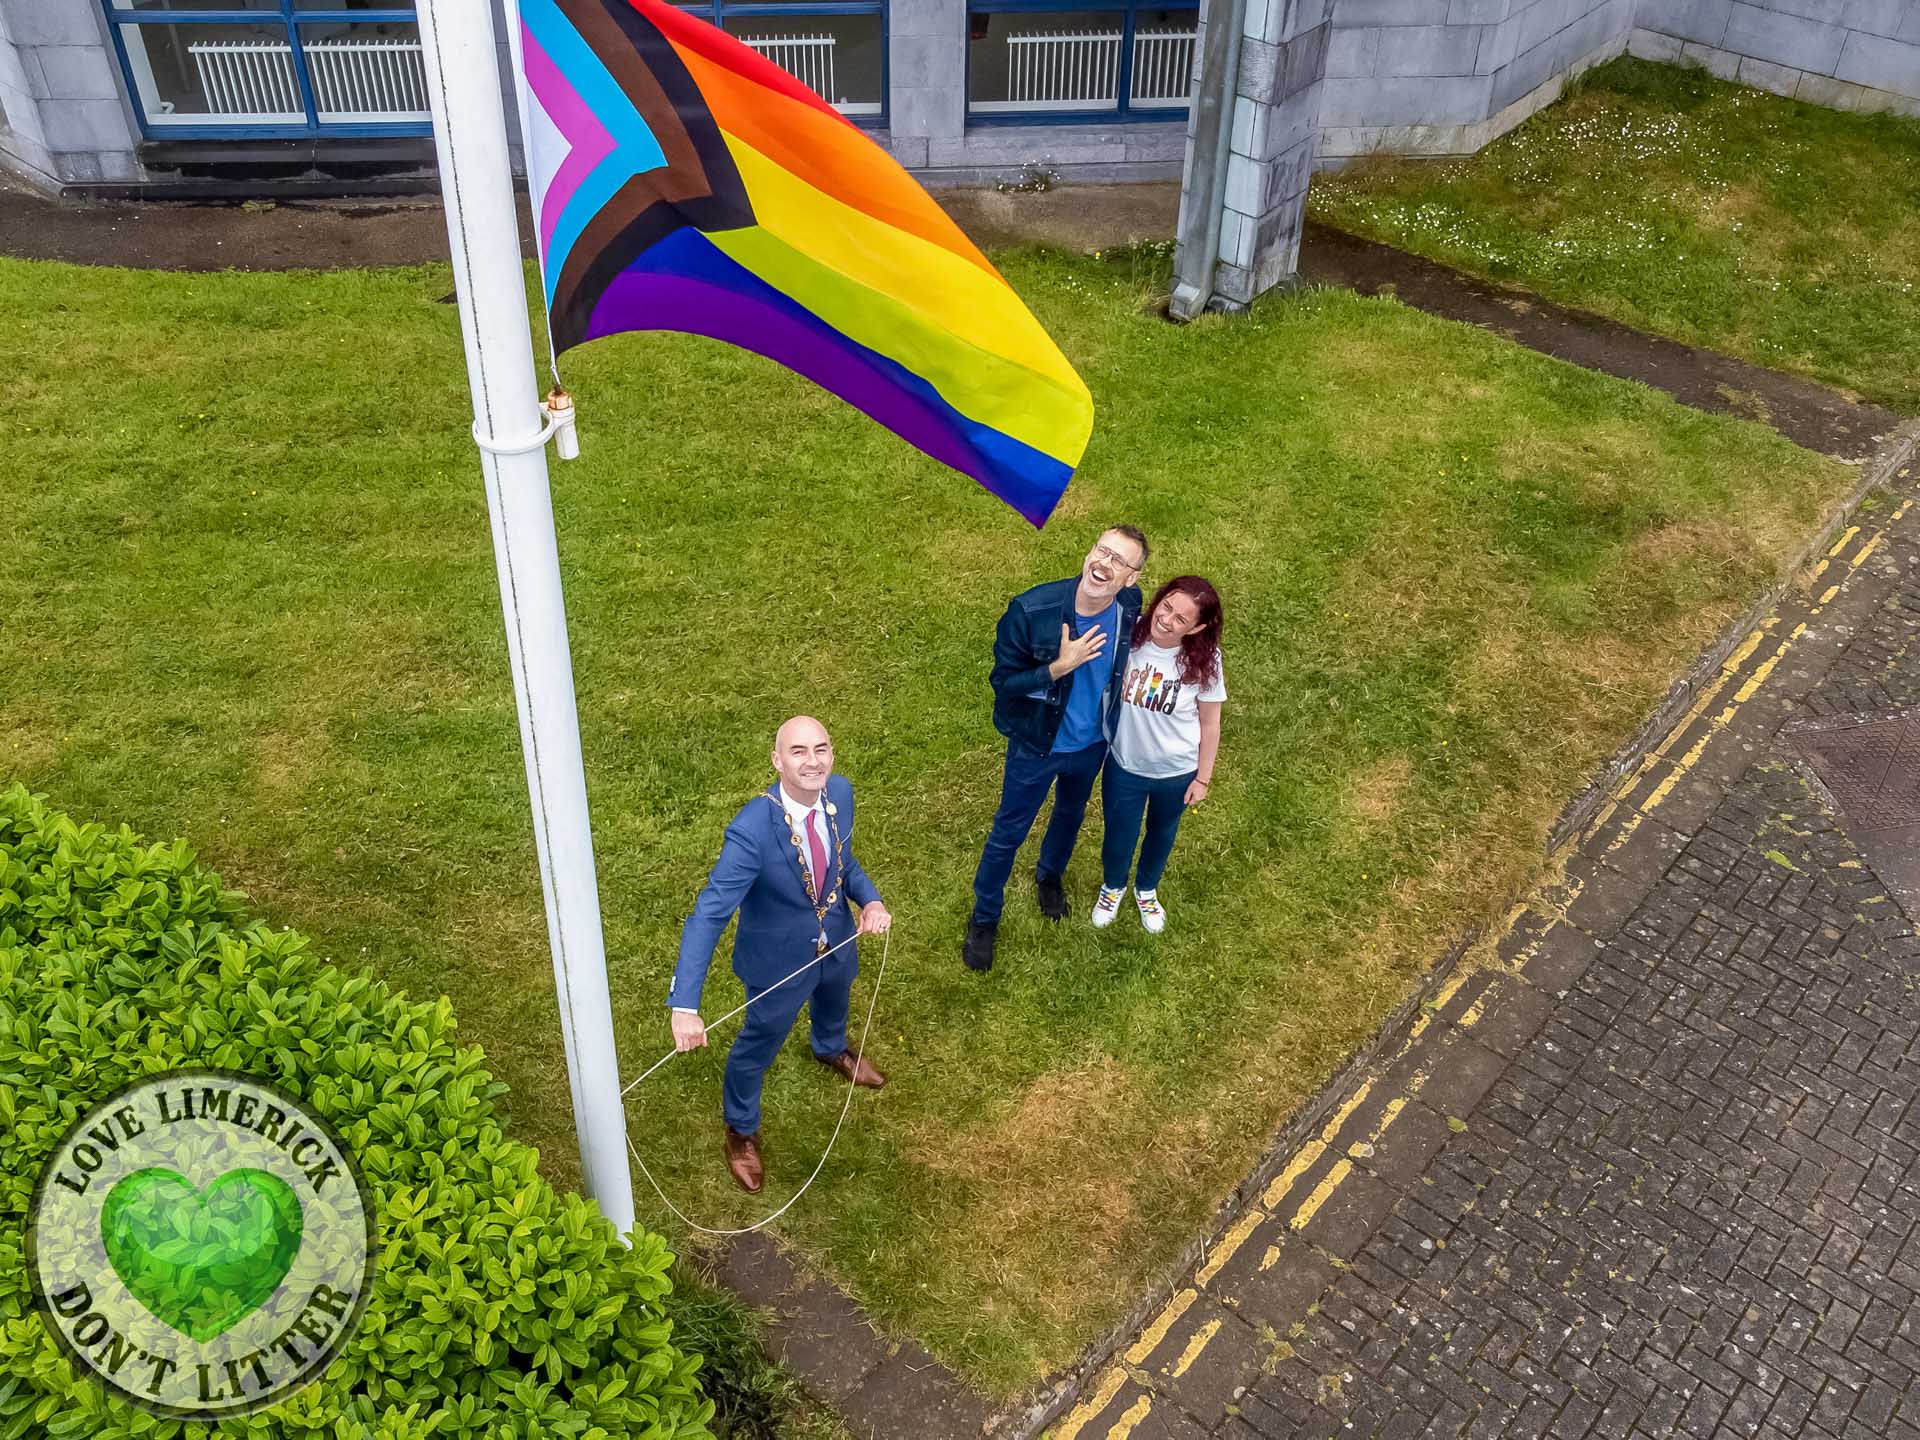 2022 Limerick Pride flag  - Daniel Butler, Mayor of Limerick City and County, raised the flag at City Hall and wished everybody a happy Limerick Pride. Picture: Kris Luszczki/ilovelimerick